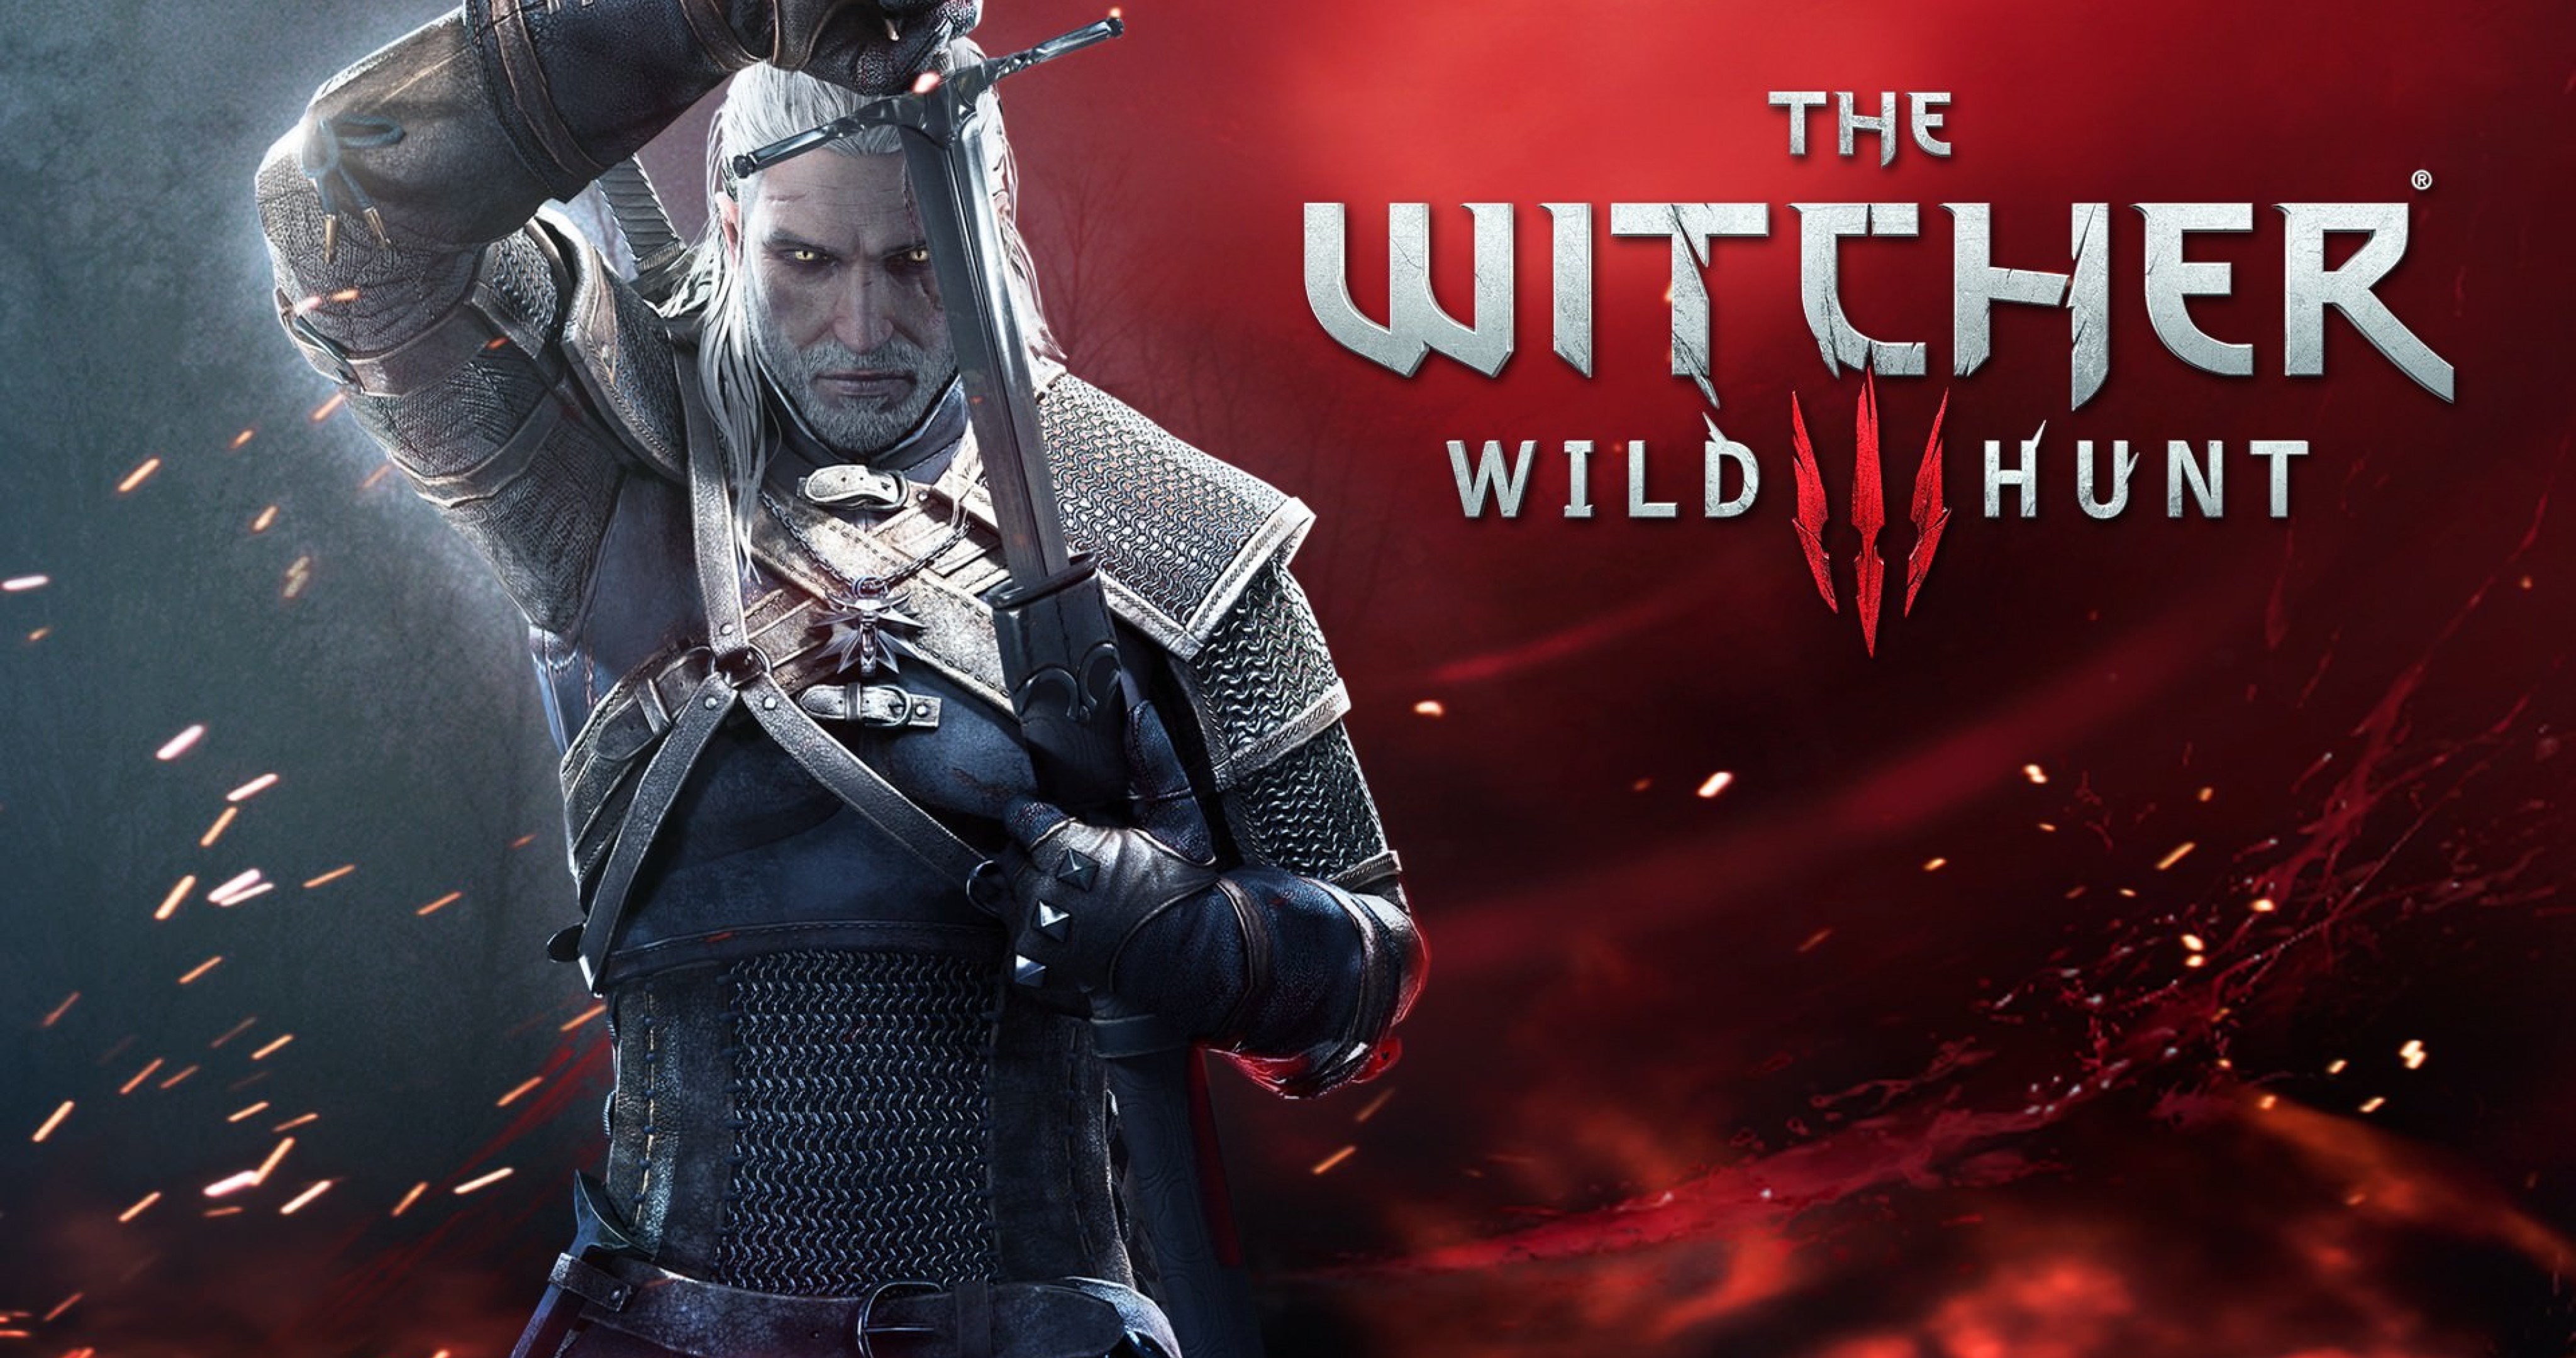 the witcher 3 wild hunt game 4k ultra HD wallpaper High quality